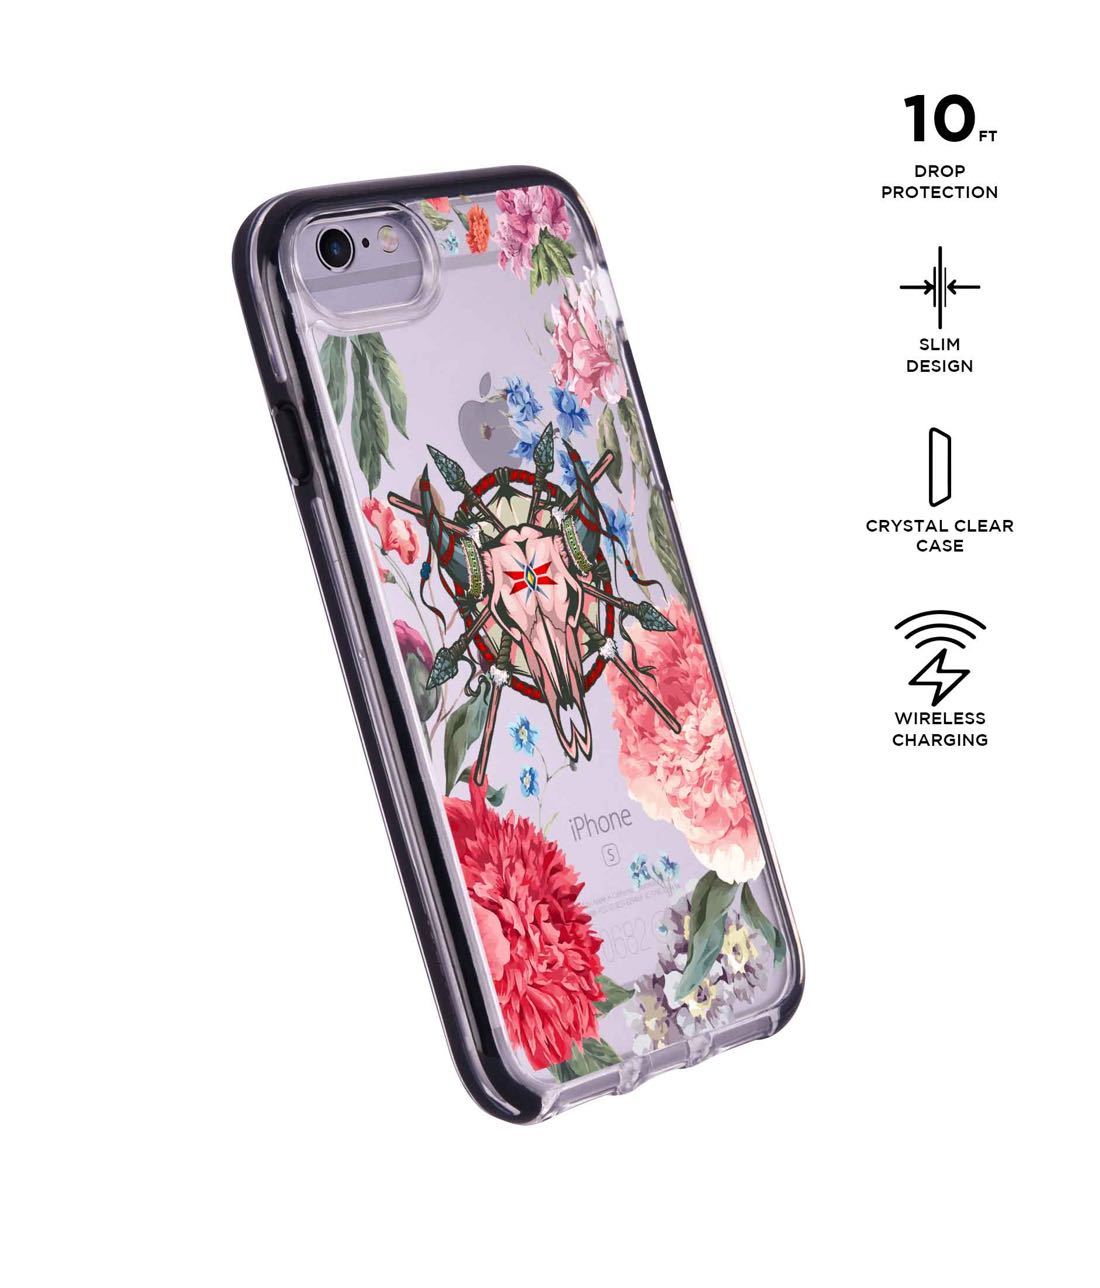 Floral Symmetry - Extreme Phone Case for iPhone 6S Plus